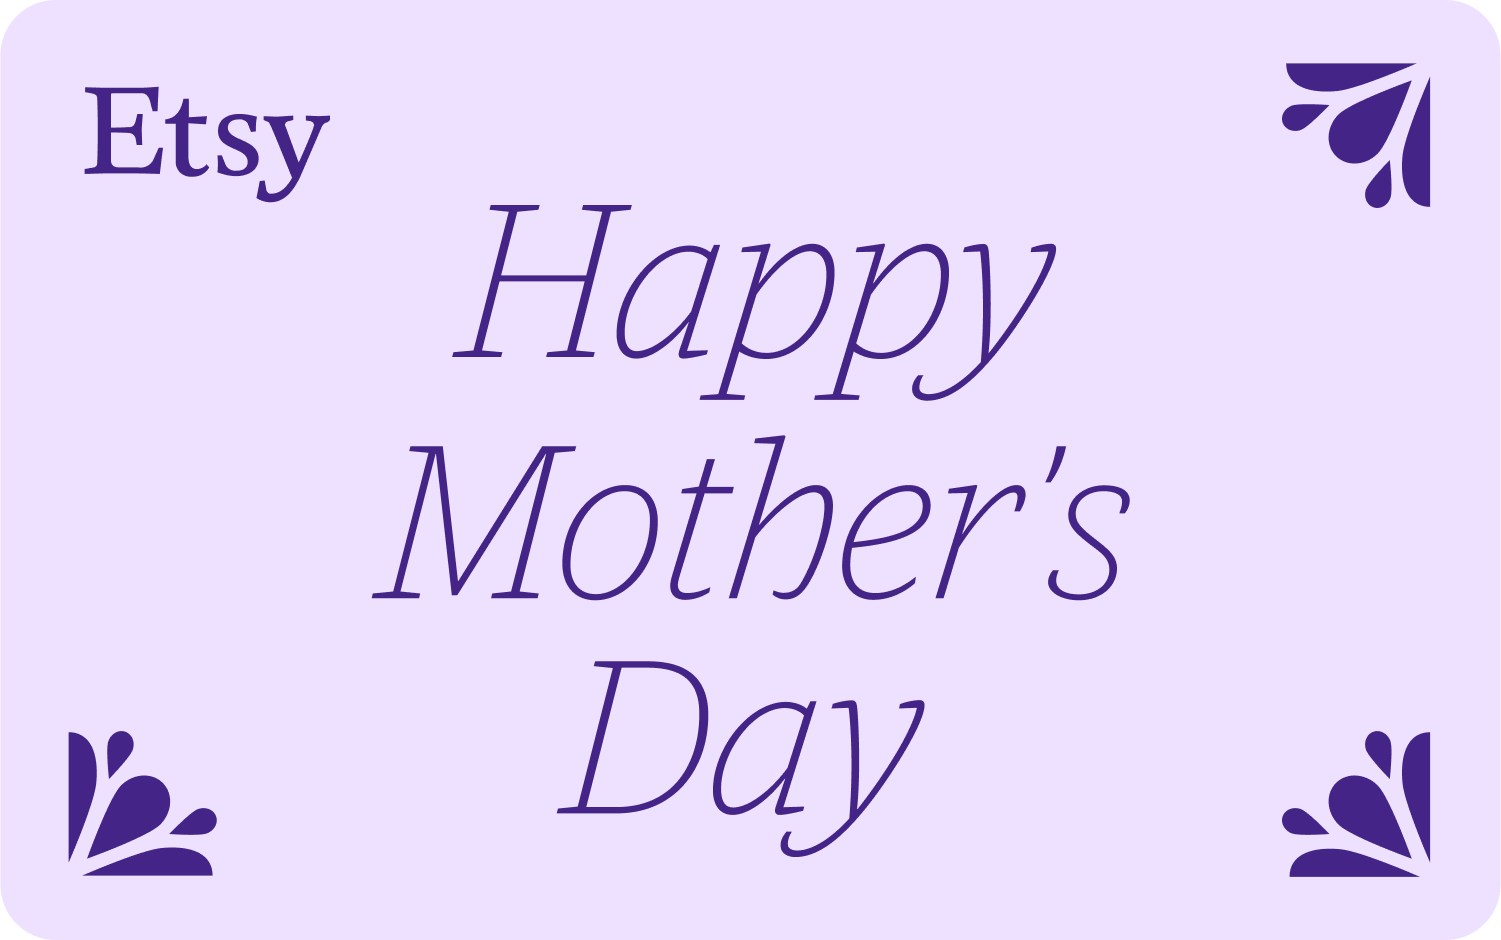 Illustration of a lavender background with flowers in the bottom and top right corners in purple with the Etsy logo on the top left corner and Happy Mother's Day in the centre in purple font